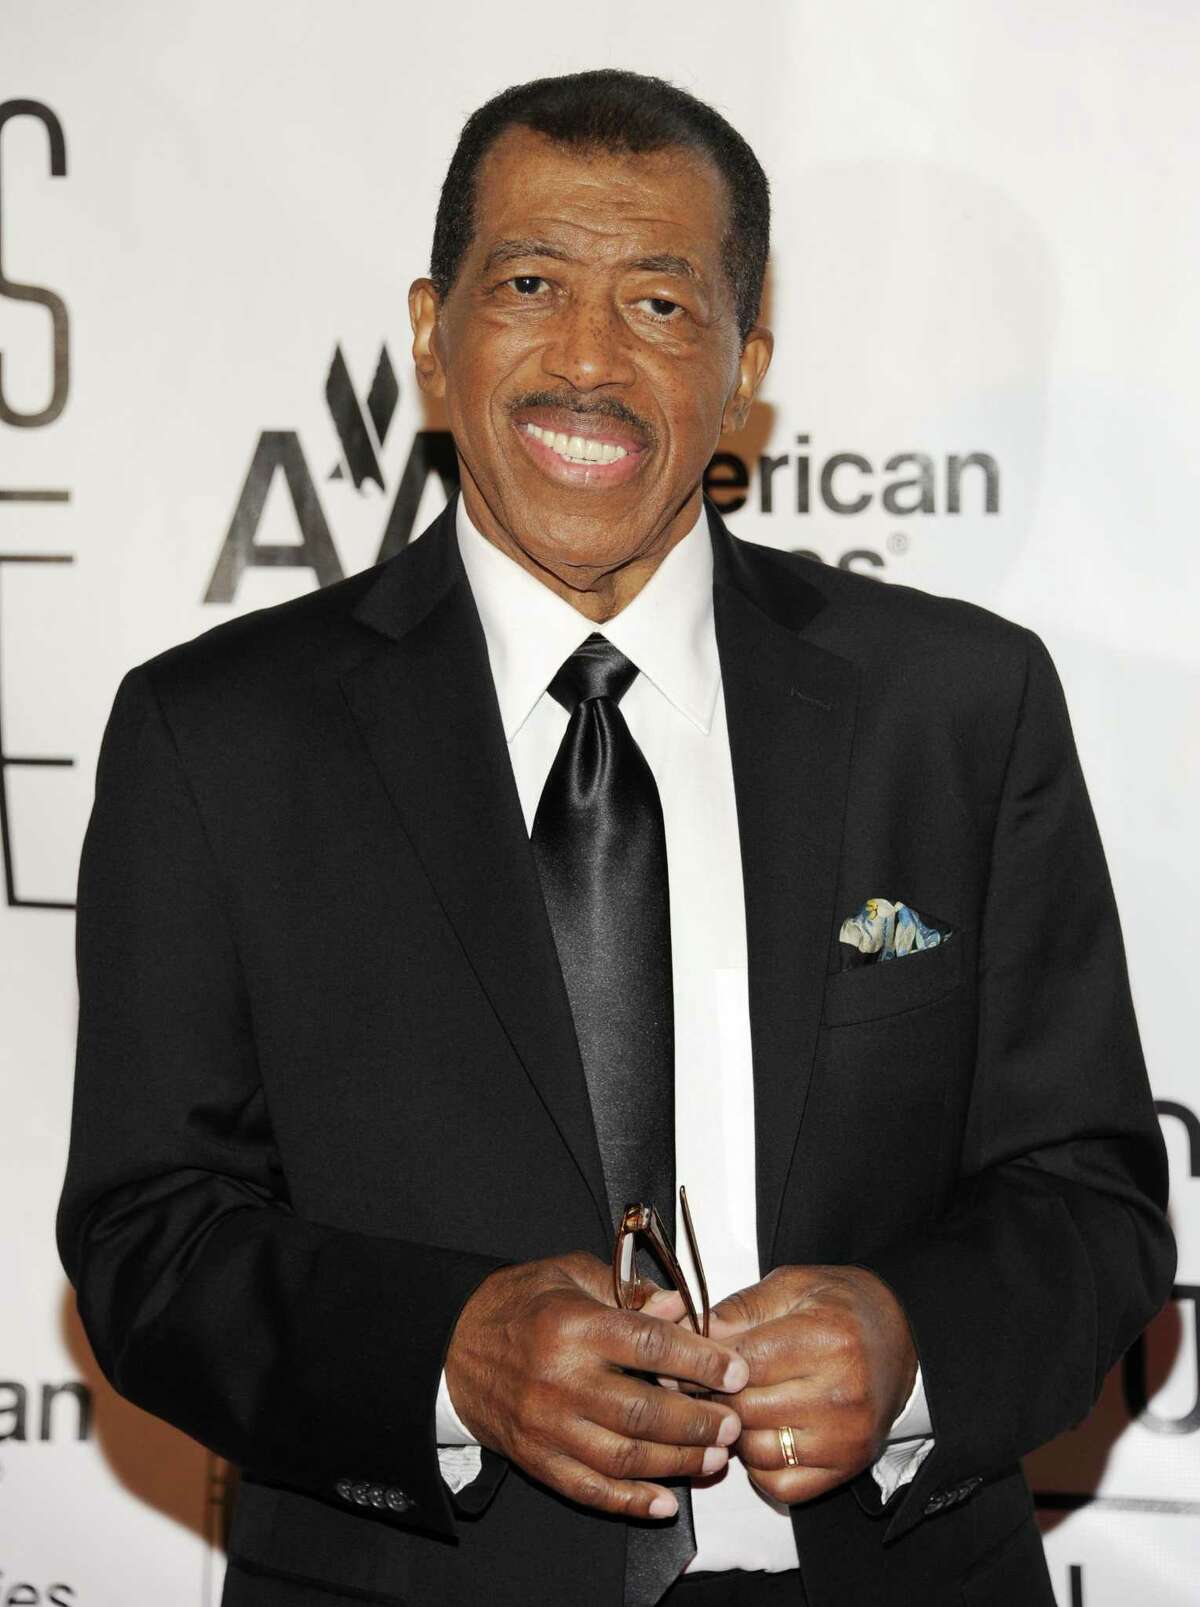 FILE - In this June 14, 2012, file photo, Towering Performance Award inductee Ben E. King arrives at the 2012 Songwriters Hall of Fame induction and awards gala in New York. King, singer of such classics as “Stand By Me,” “There Goes My Baby” and “Spanish Harlem,” died Thursday, April 30, 2015, publicist Phil Brown told The Associated Press. He was 76.